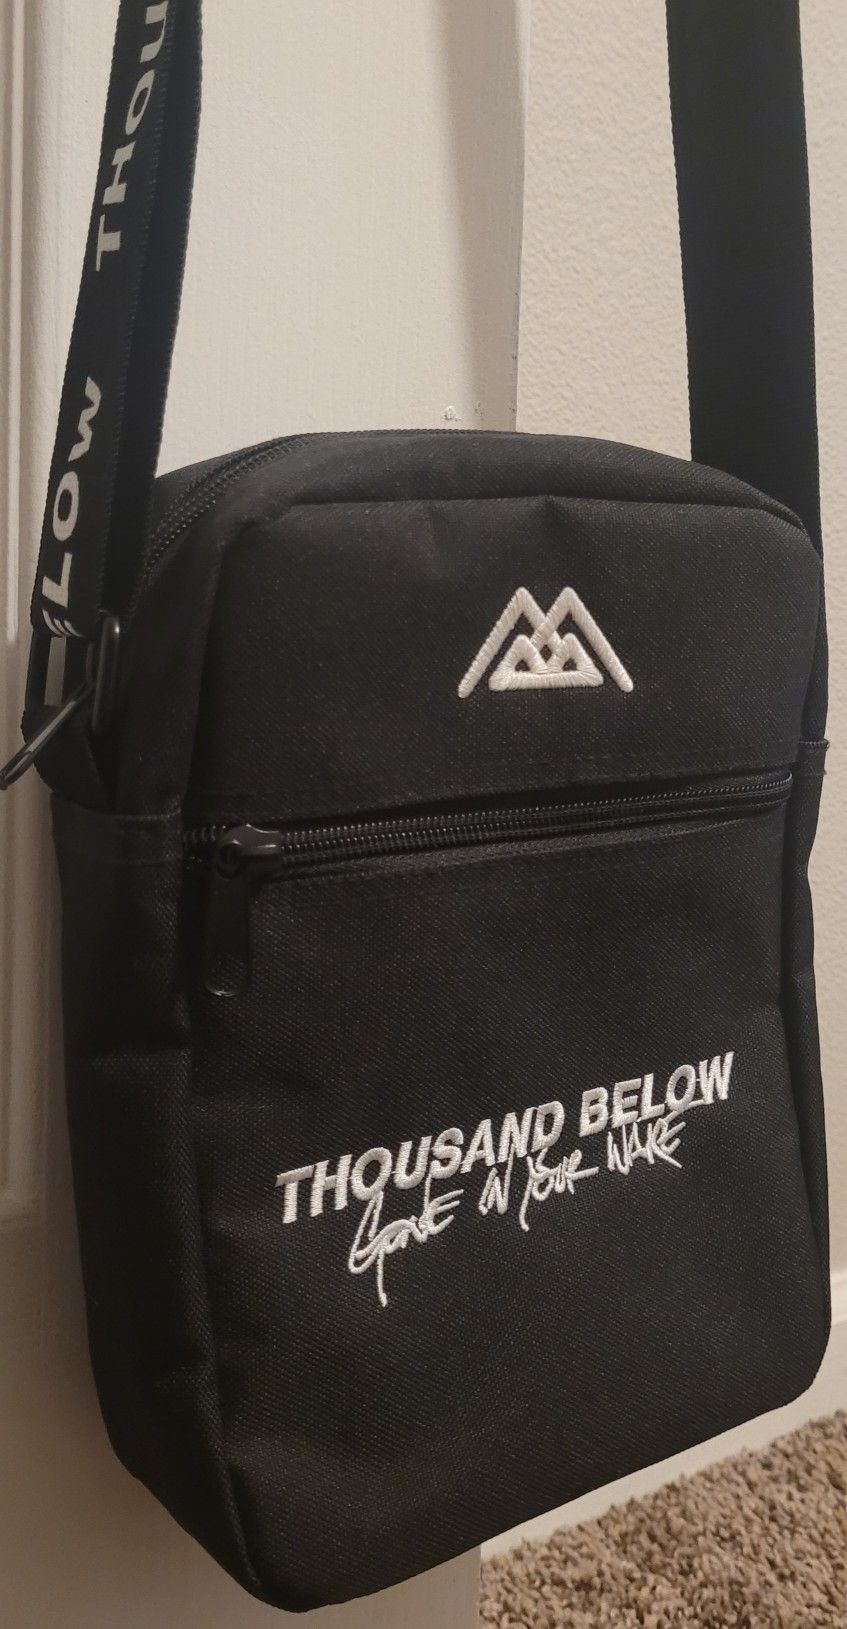 Thousand Below "Gone In Your Wake" small messenger bag